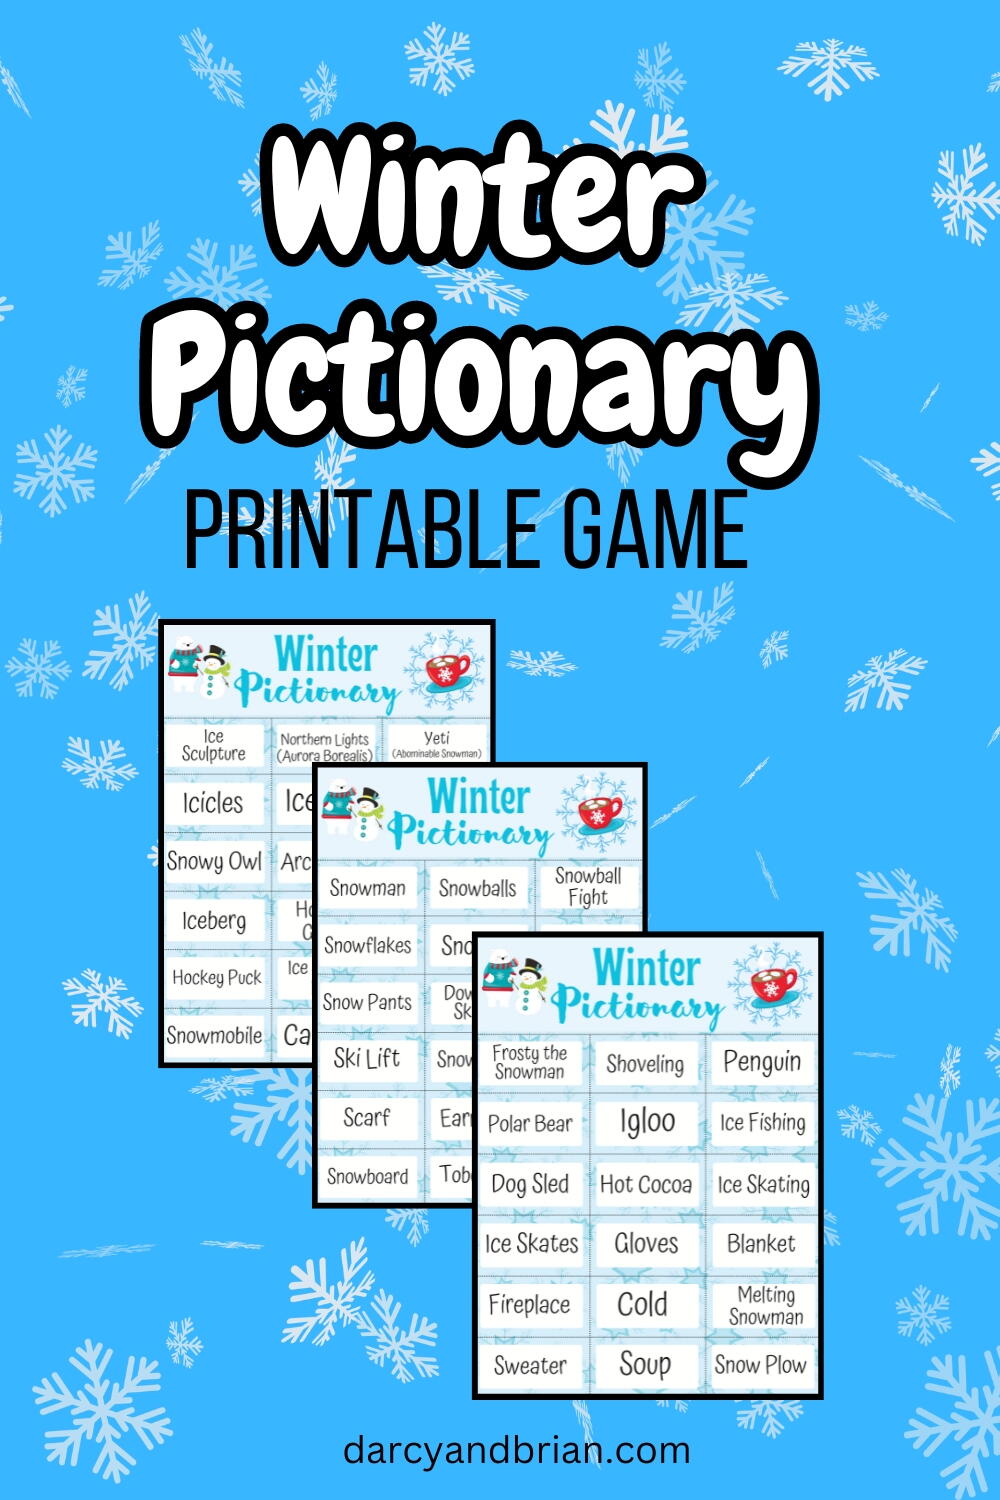 Science Pictionary Printable Game for Kids